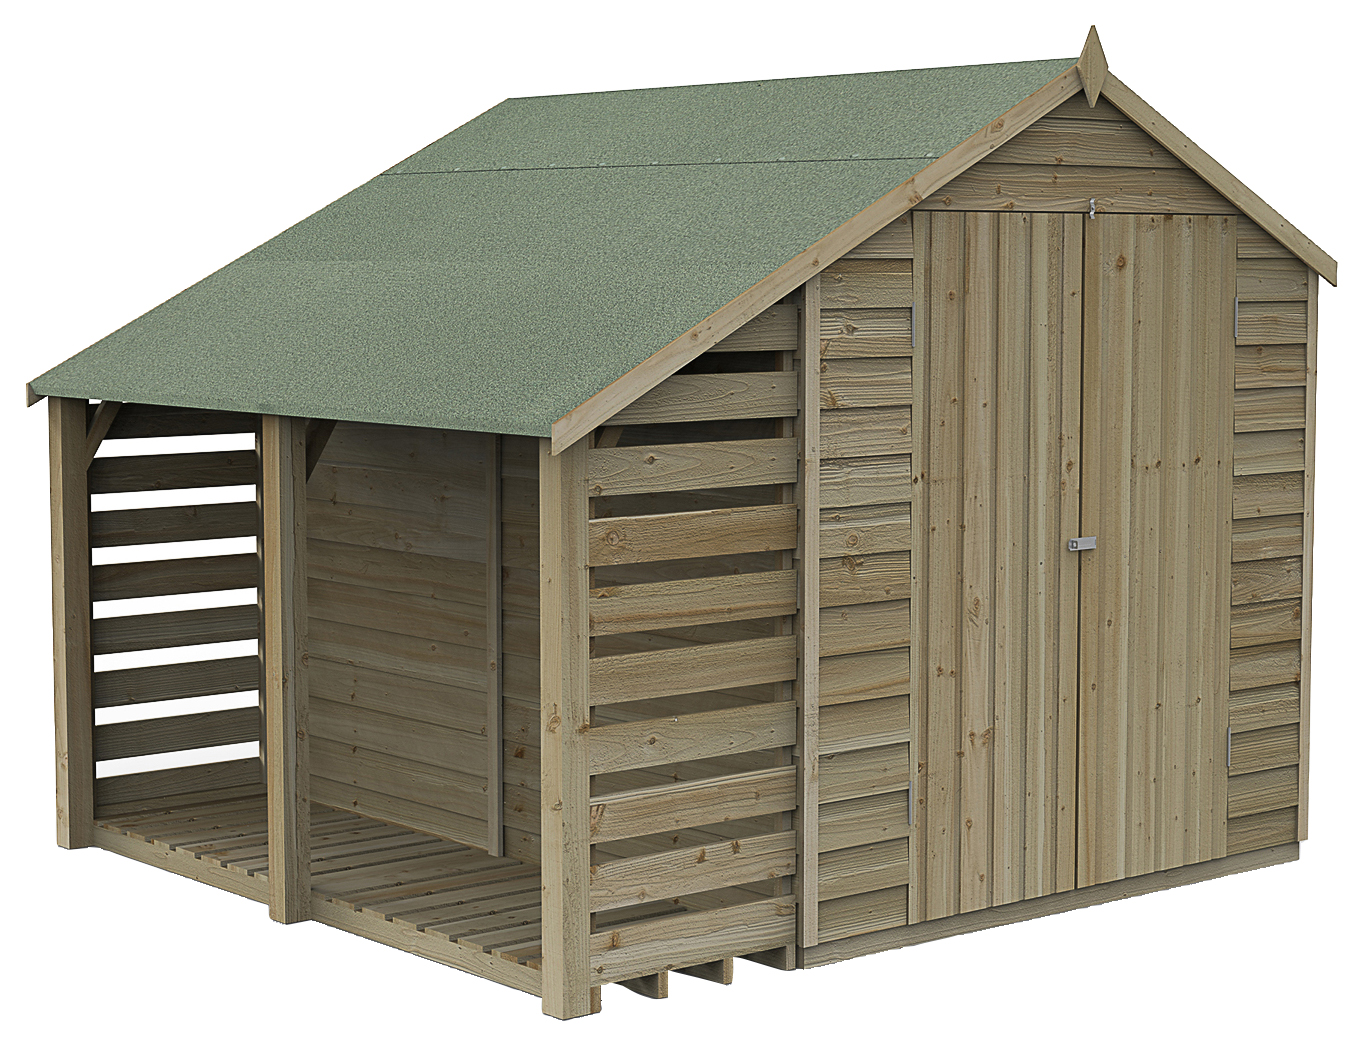 Forest Garden 8 x 6ft 4Life Apex Overlap Pressure Treated Double Door Windowless Shed with Lean-To and Assembly